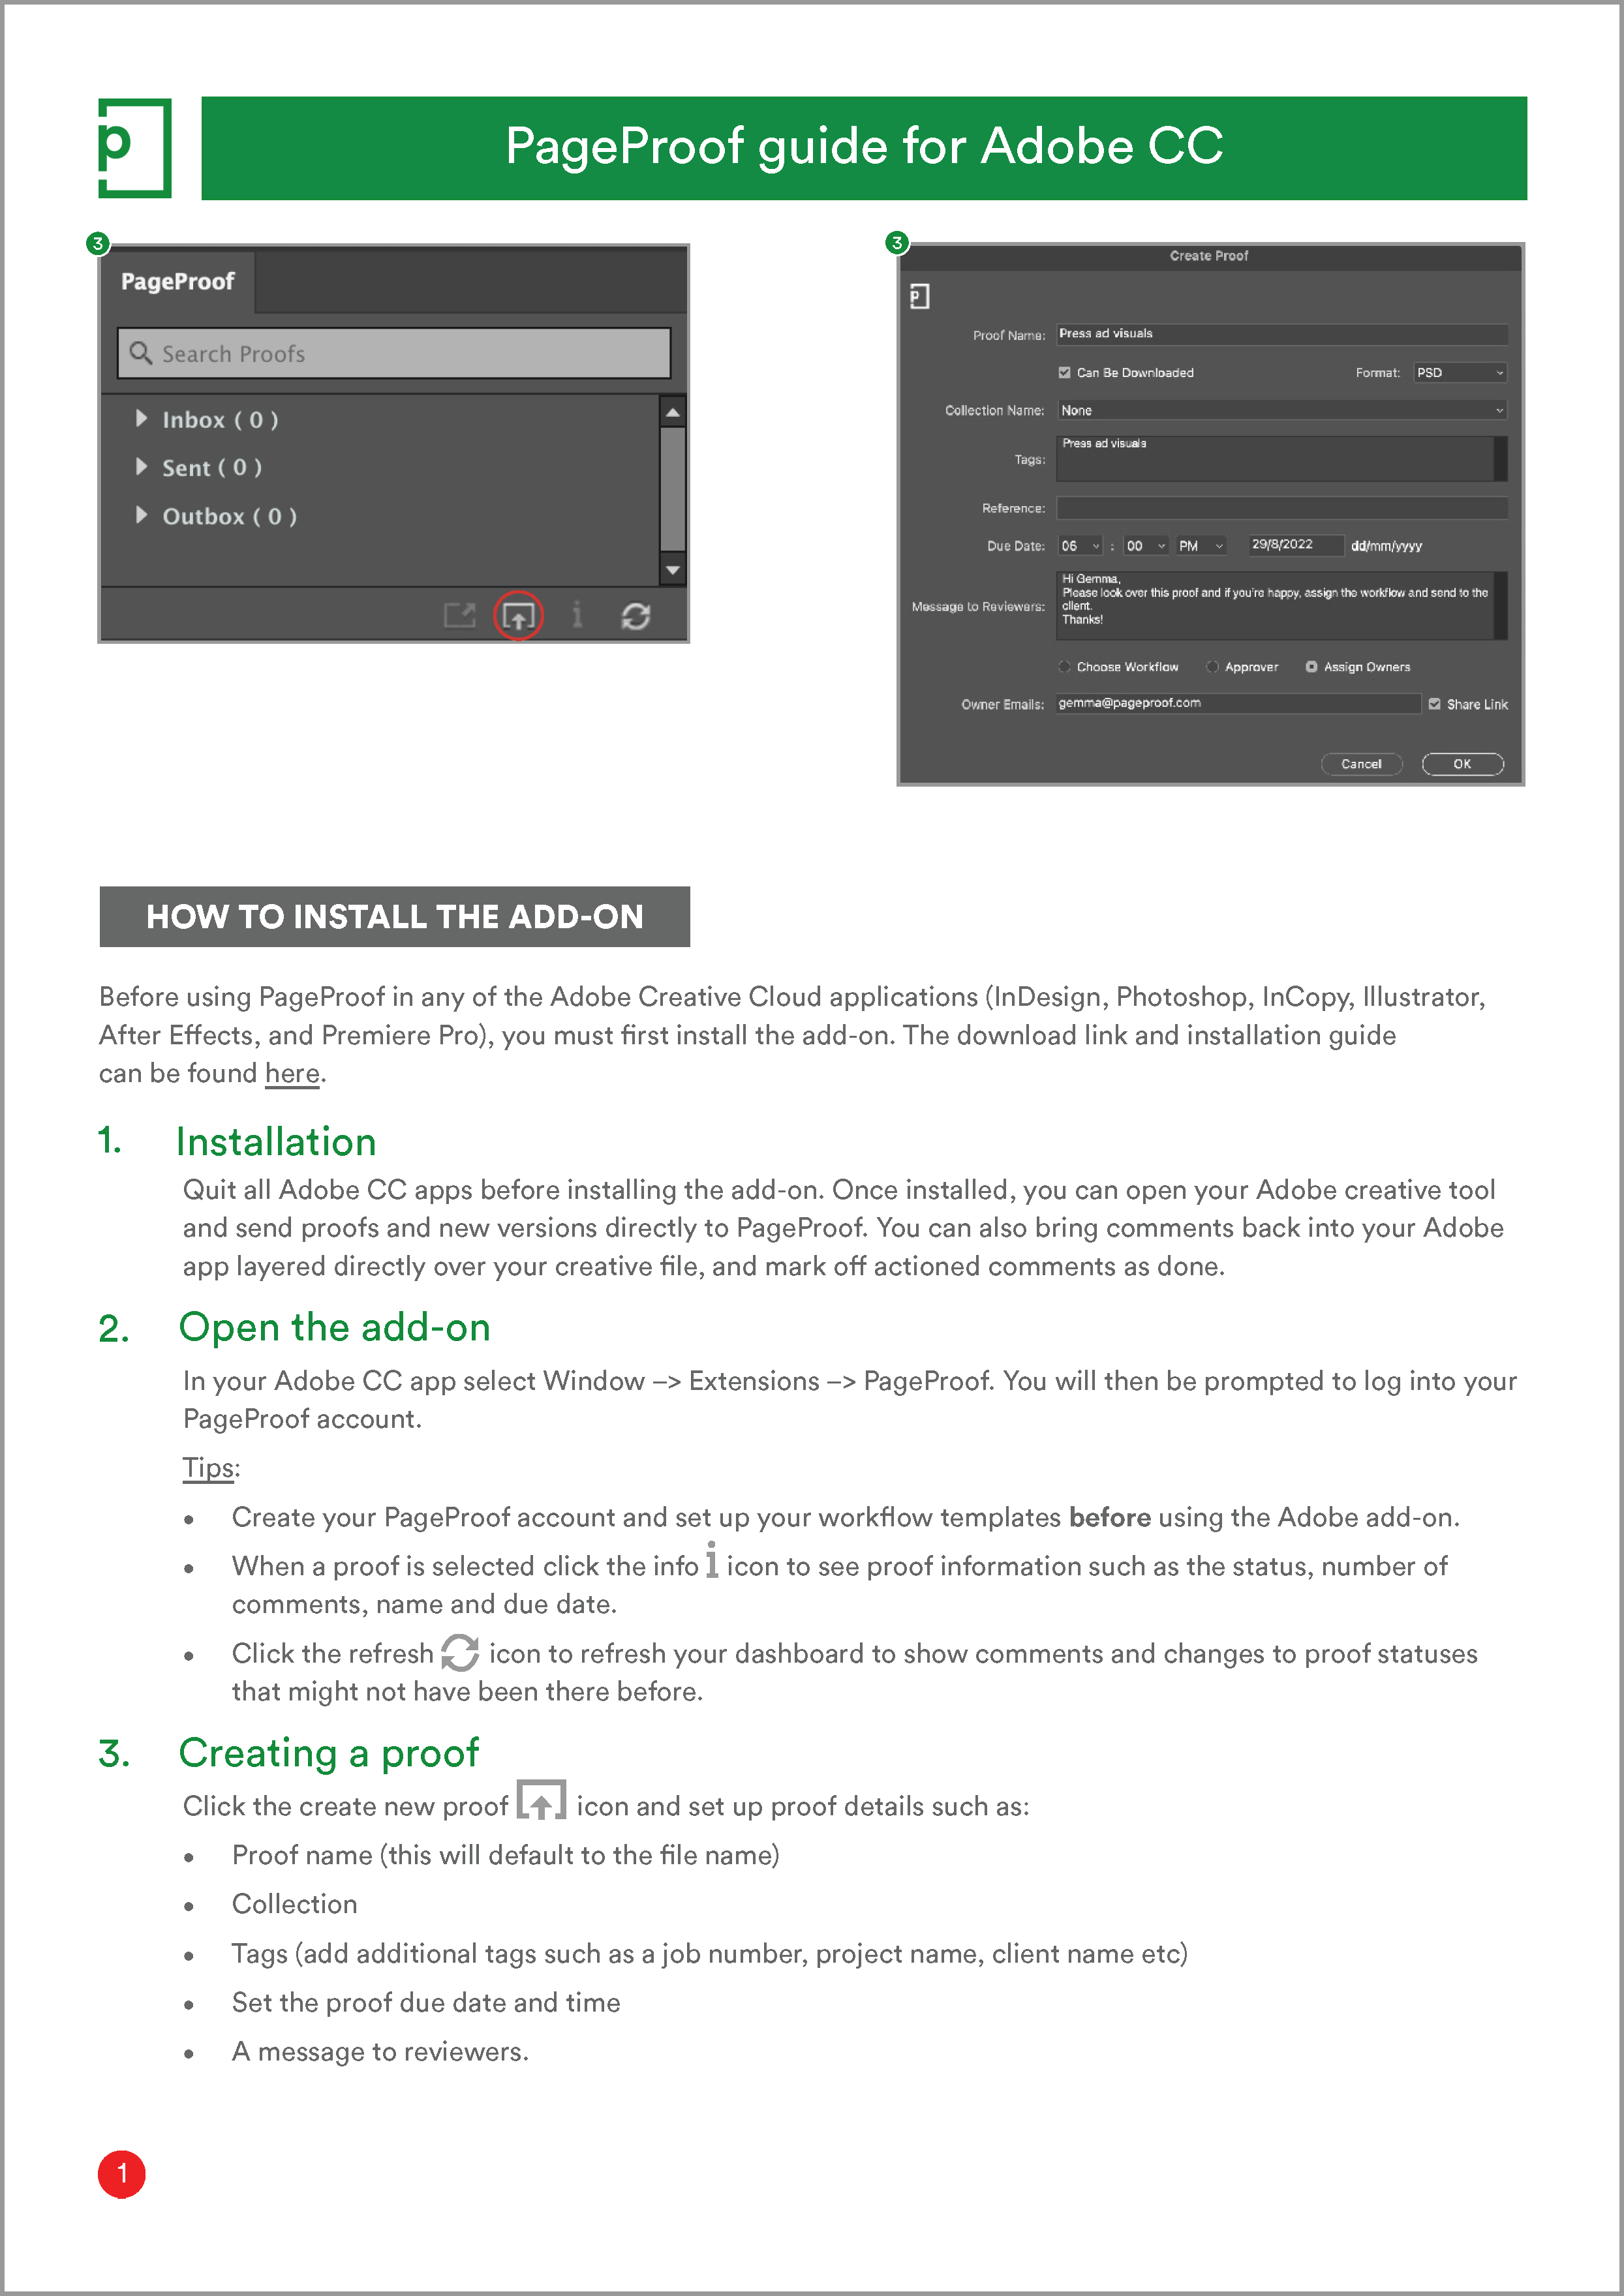 Cover page of the PageProof quick guide for Adobe CC users